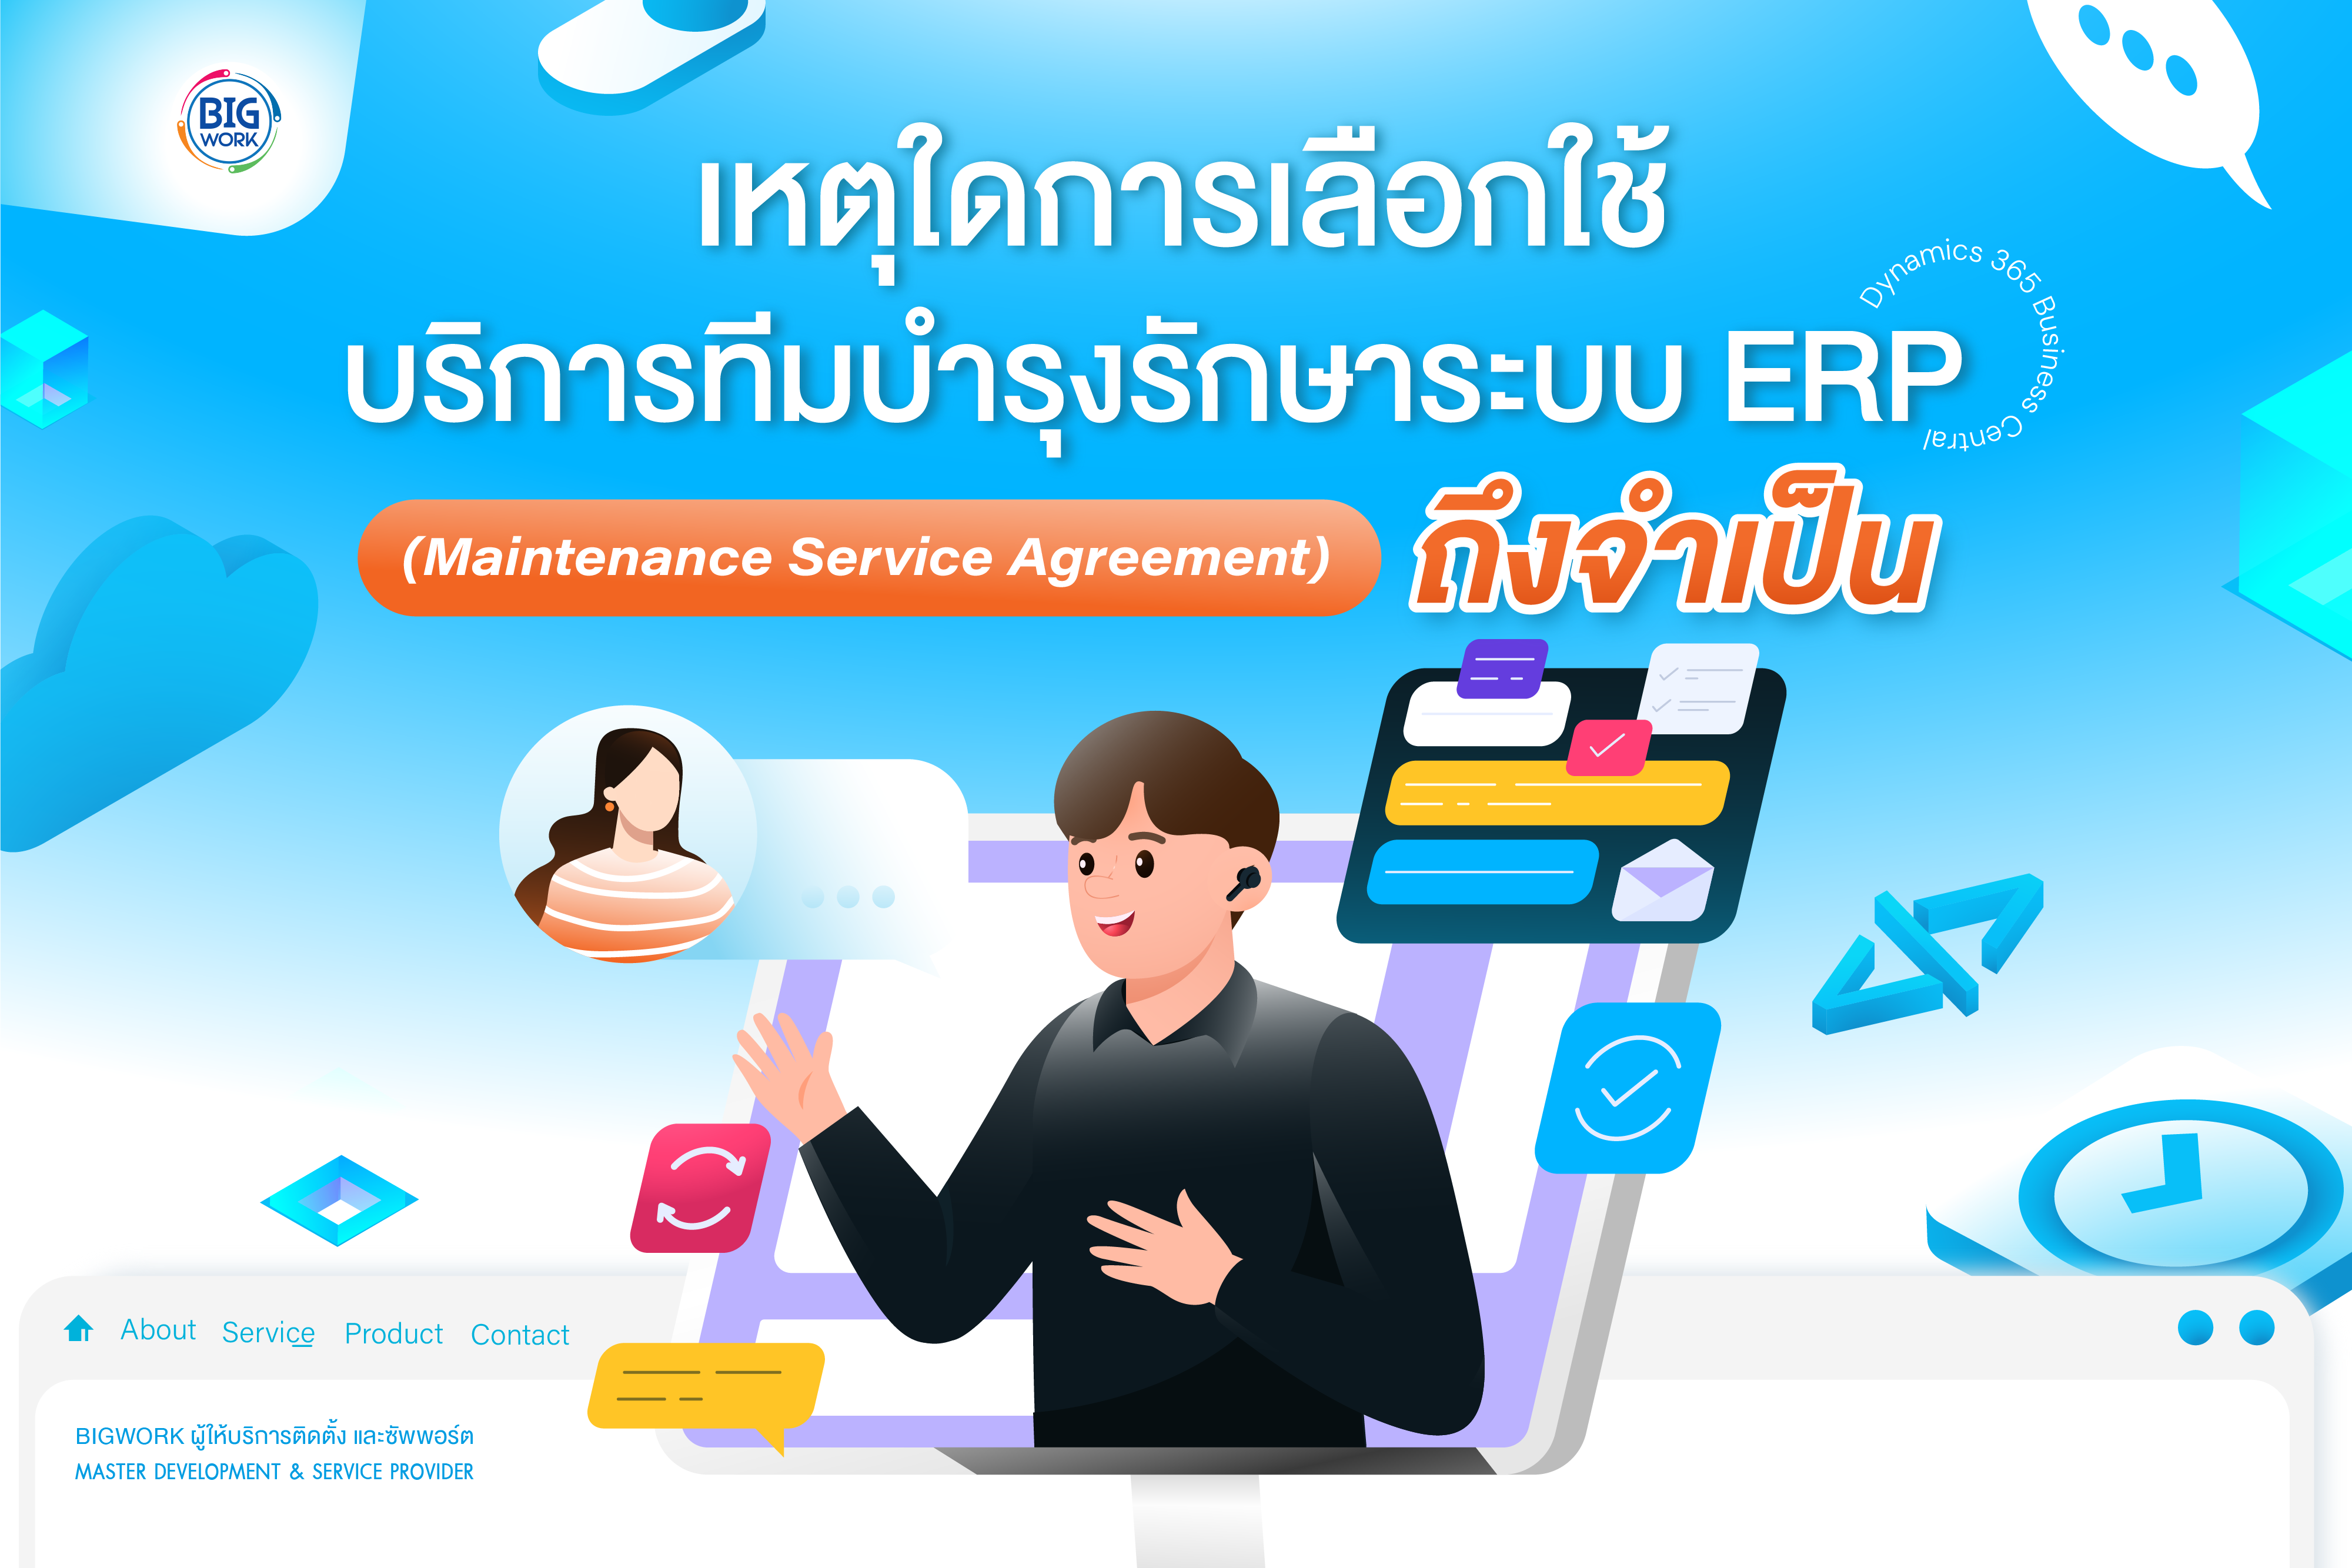 Why is ERP Maintenance Service Agreement necessary for organizations with ERP systems?